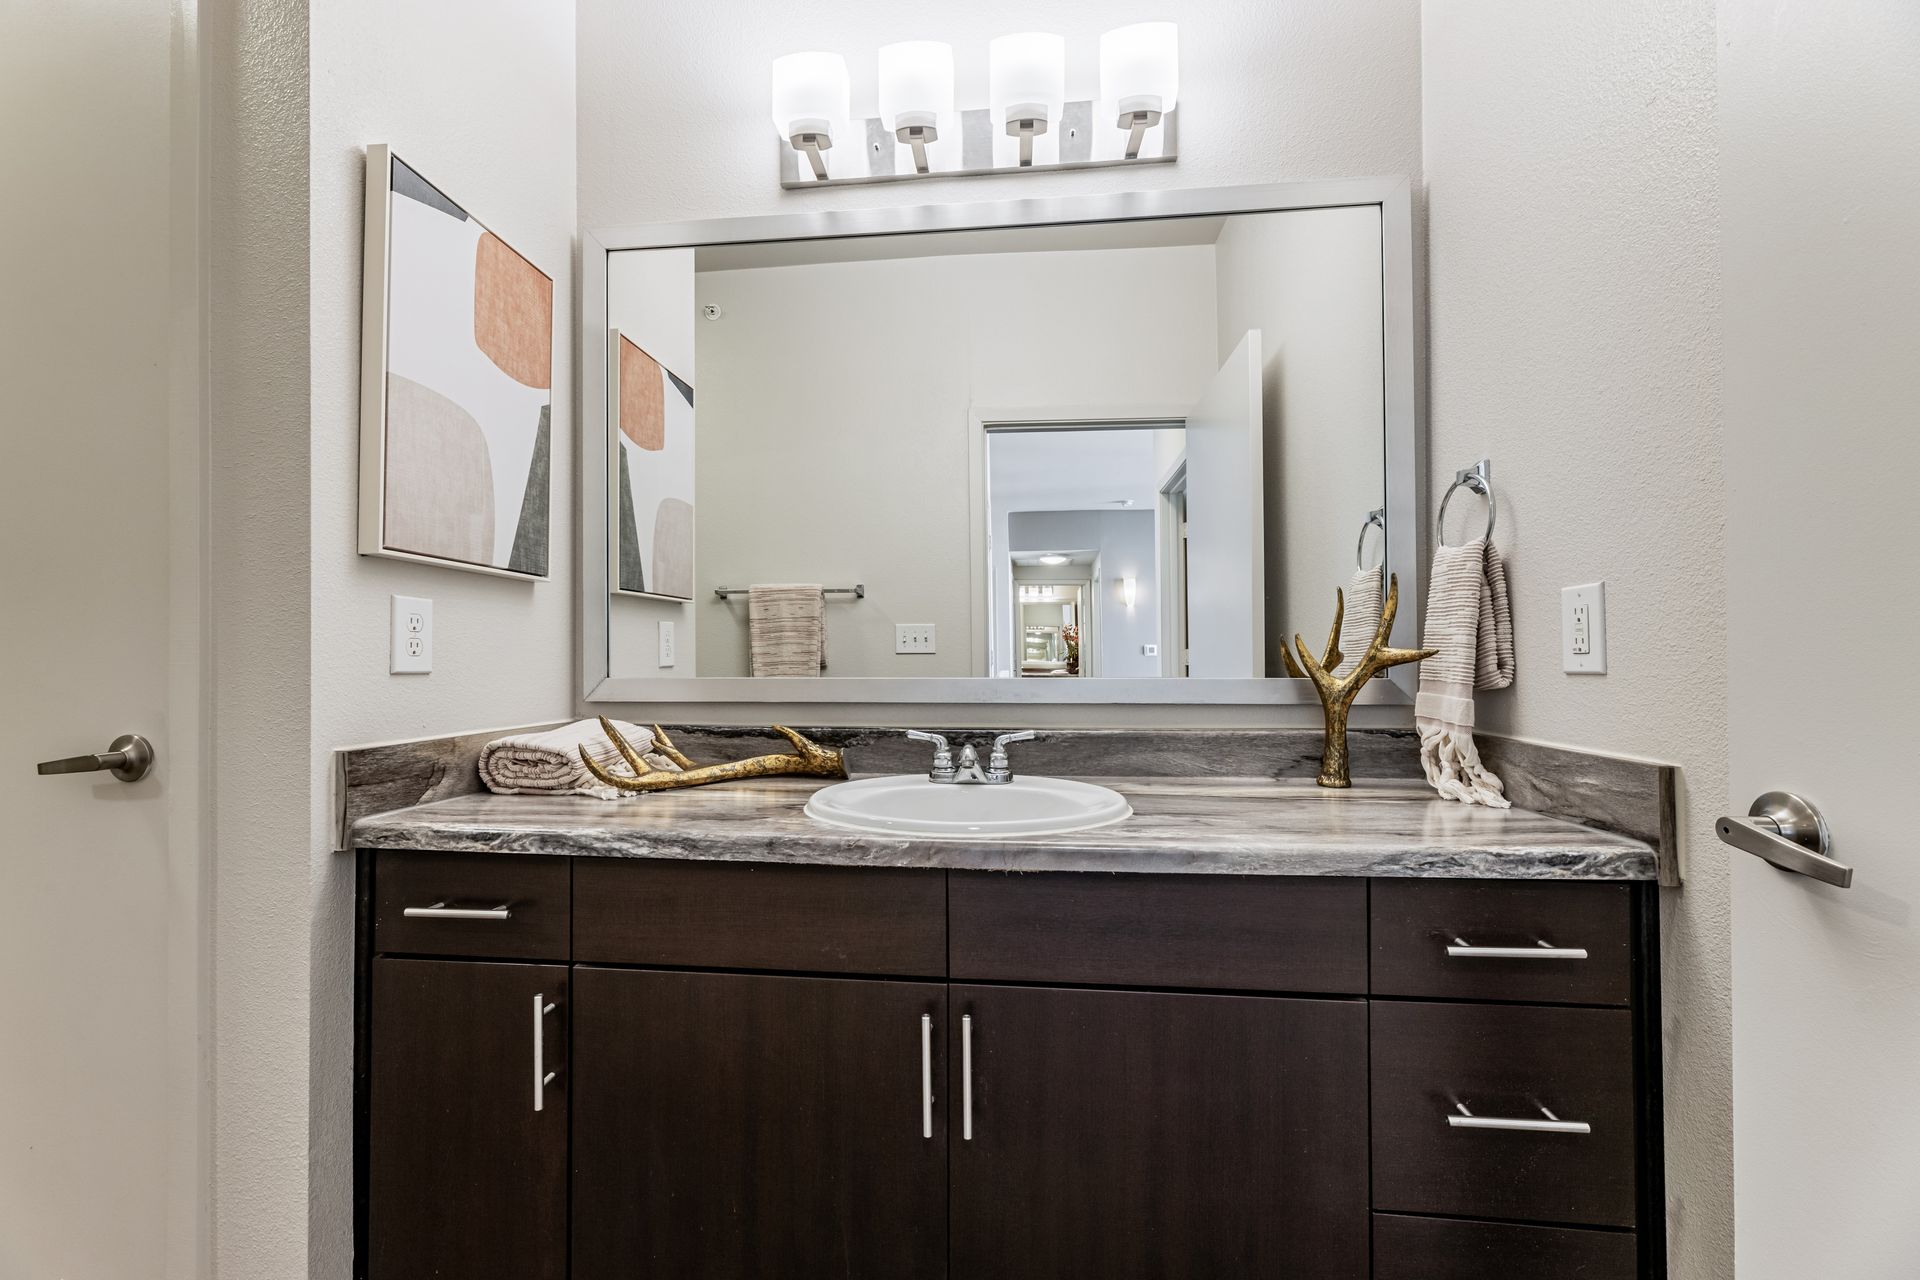 Parkside at Craig Ranch bathroom with a sink, mirror, and cabinets.